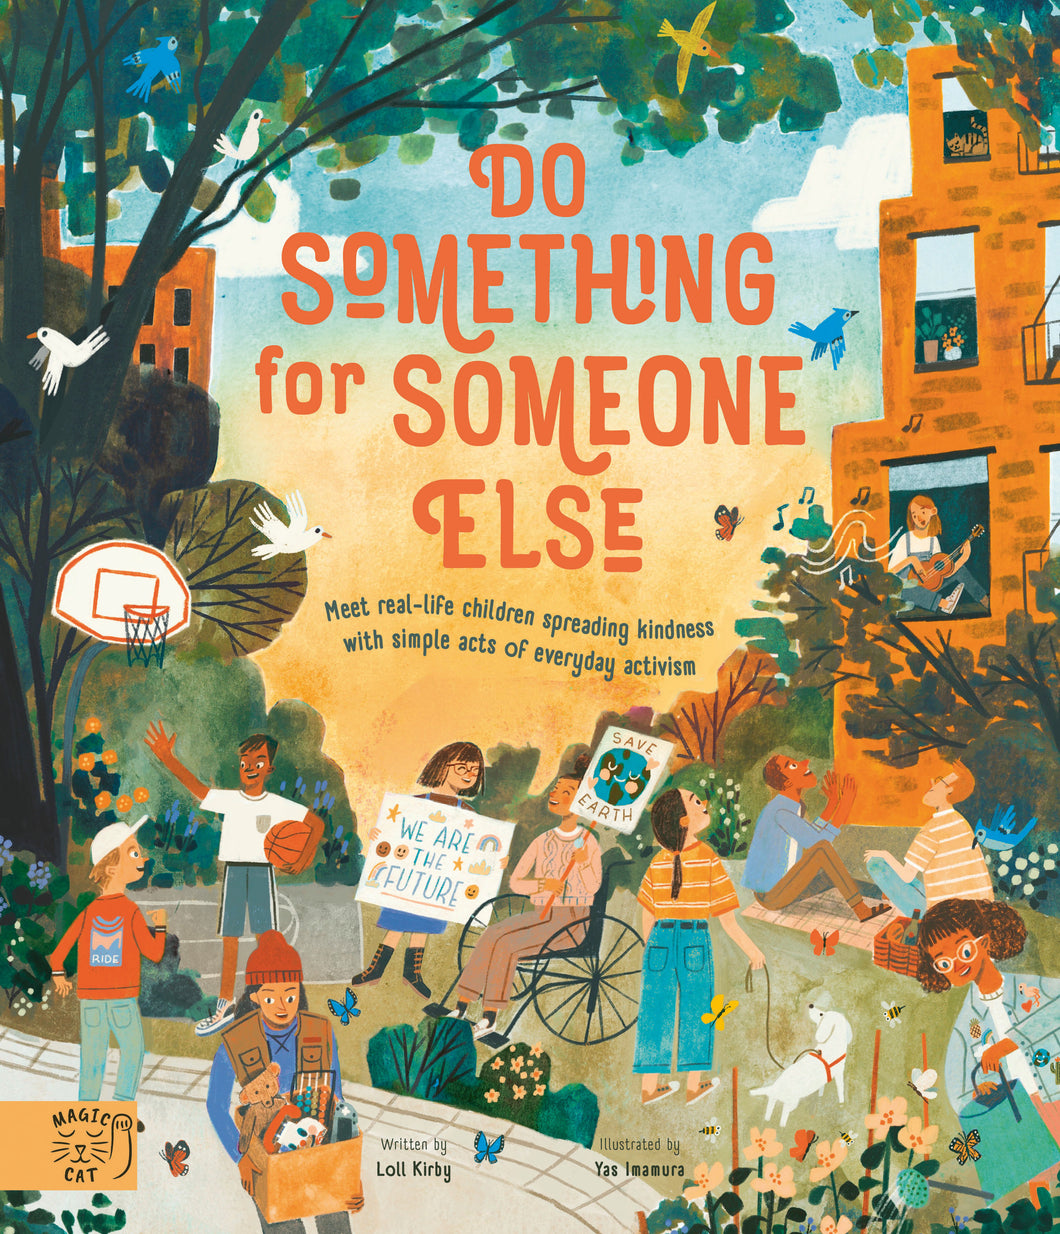 Book cover shows illustrations of diverse range of people (light to dark skin tones, men and women, boys and girls, and one person in a wheelchair) outside in a city. The tagline reads 'Meet real-life children spreading kindness with simple acts of everday activism'